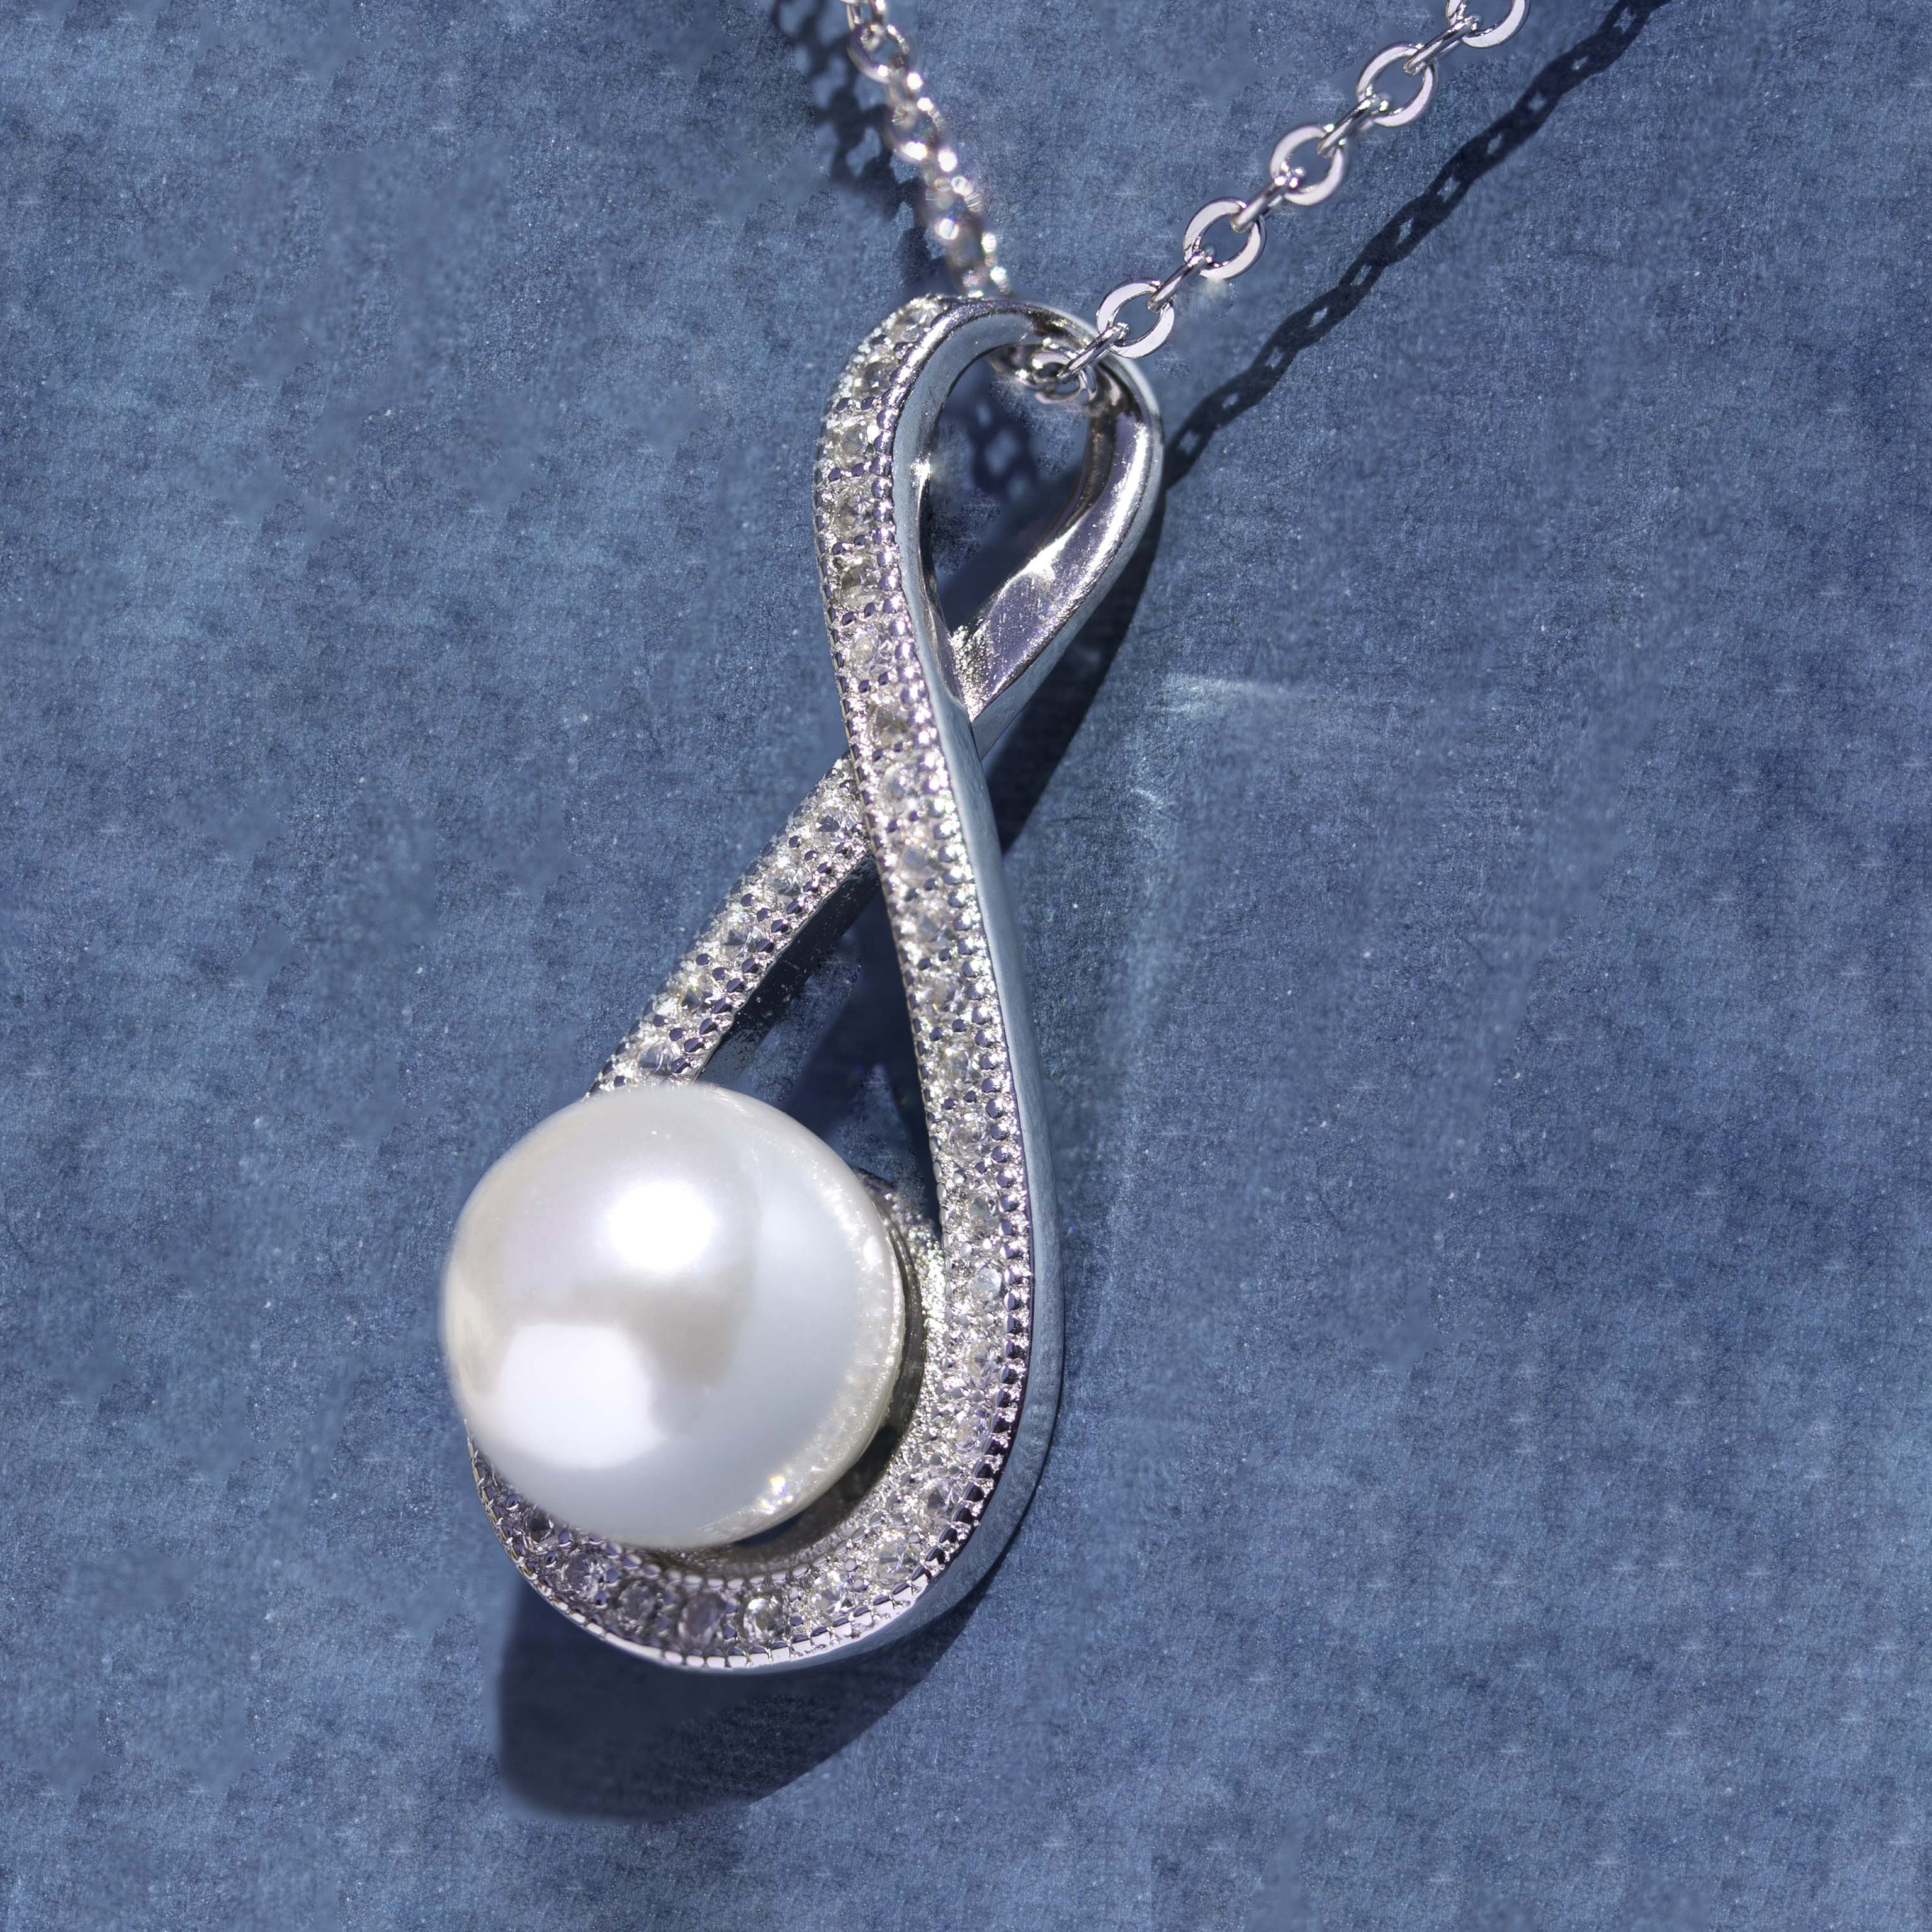 Girls Great Quality 925 Sterling Silver Infinity Unique Pearl Necklace